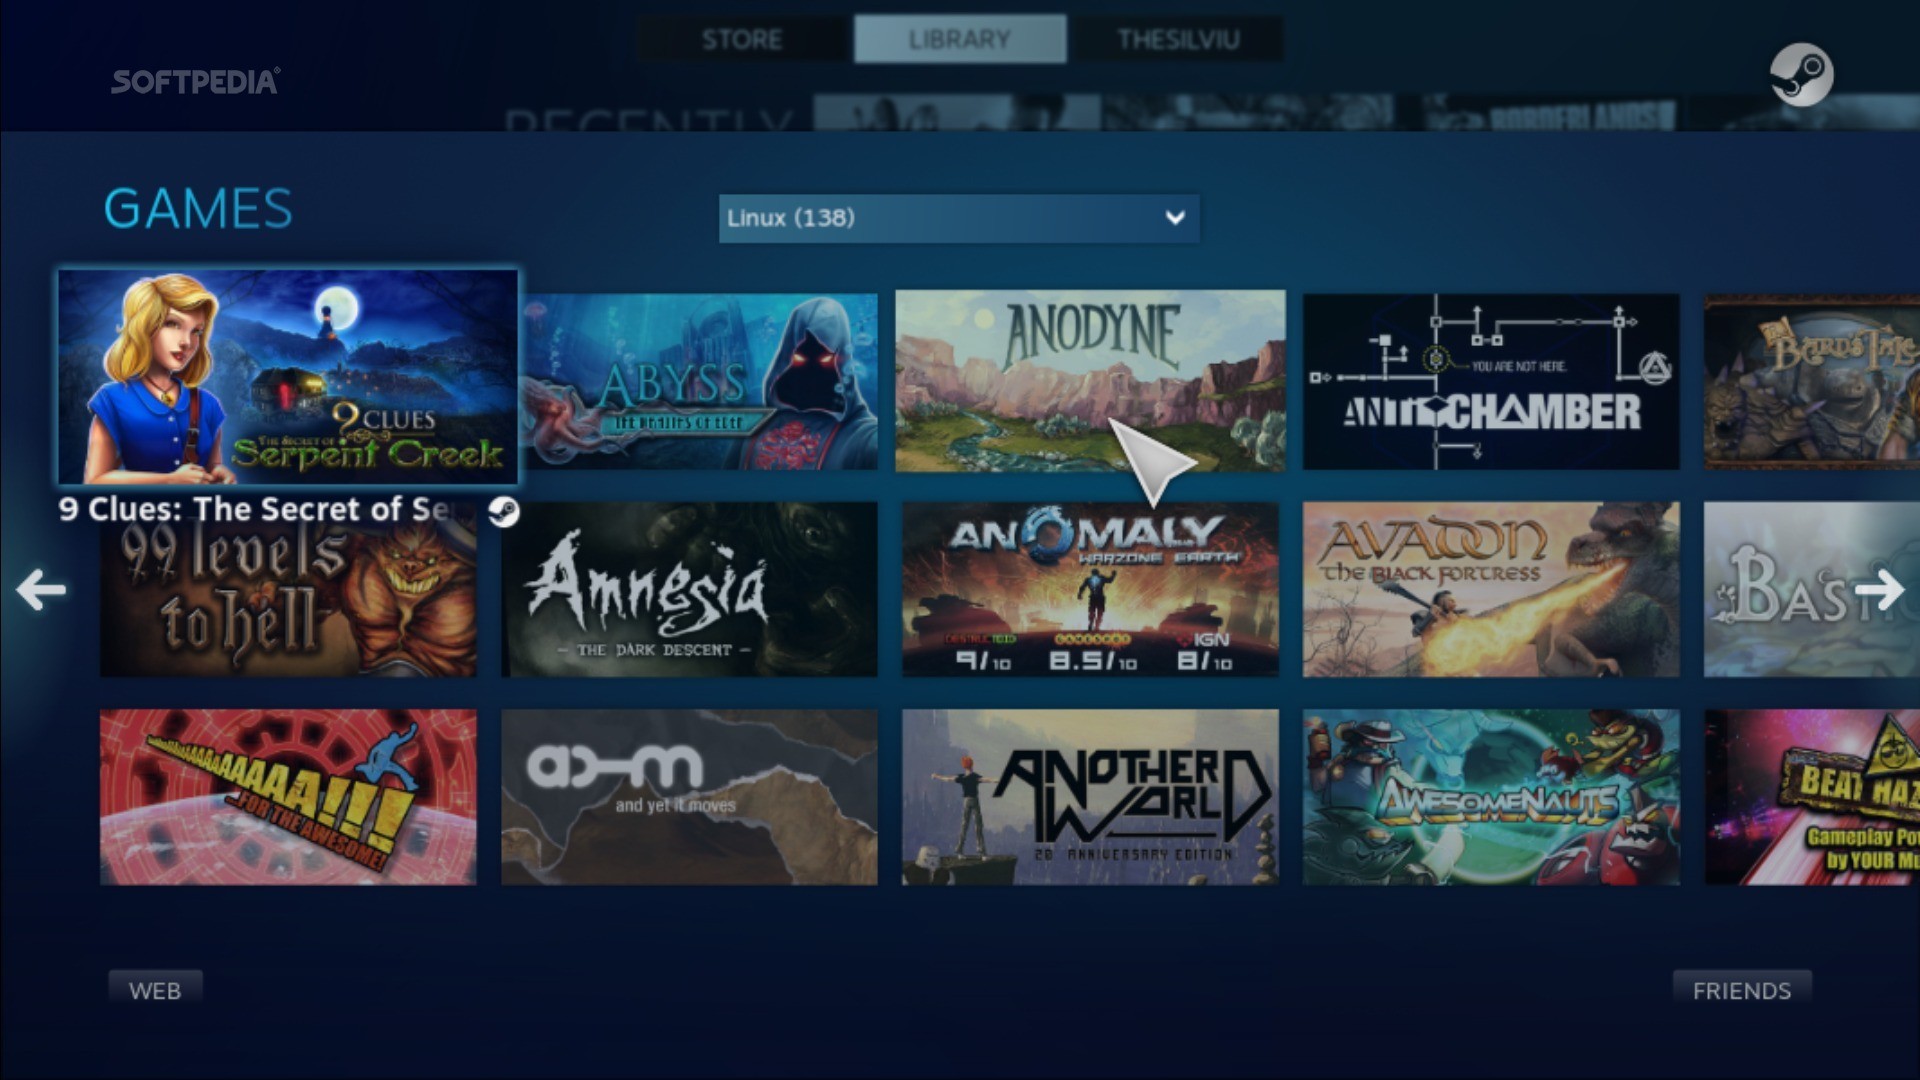 Movilizar Eficacia capitalismo SteamOS 2.84 Beta Promises to Fix "Black Screen" Issues with Nvidia GPUs